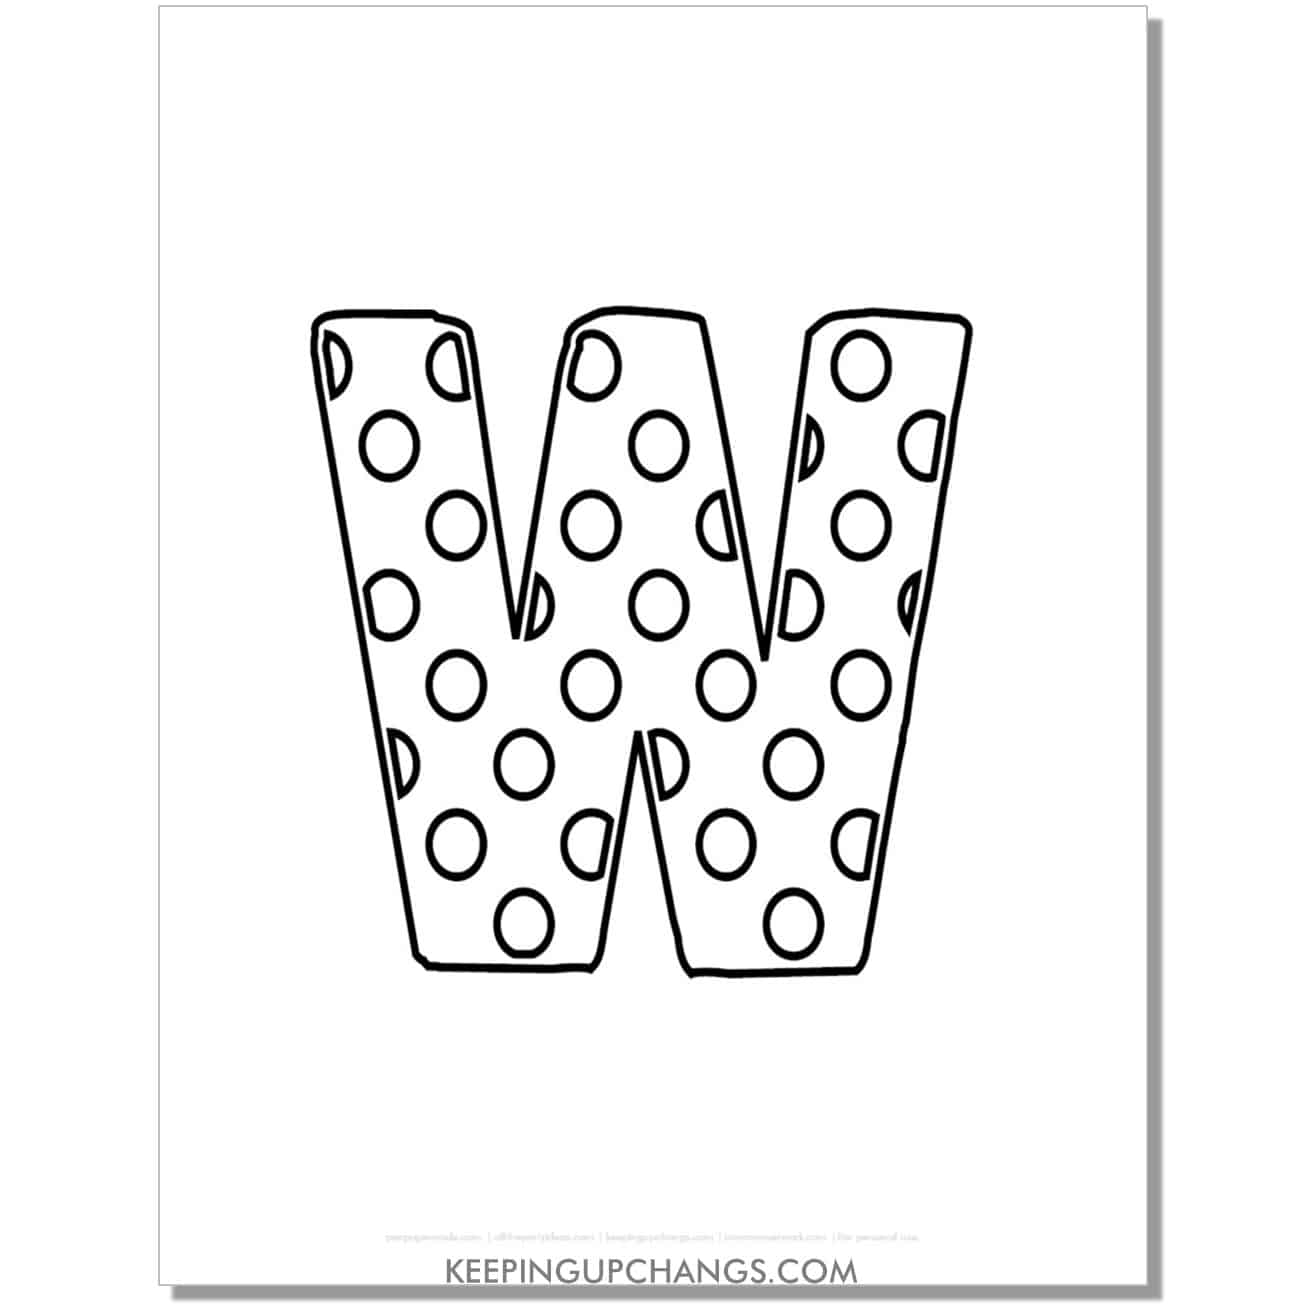 free alphabet letter w coloring page with polka dots for toddlers, preschool, kindergarten.